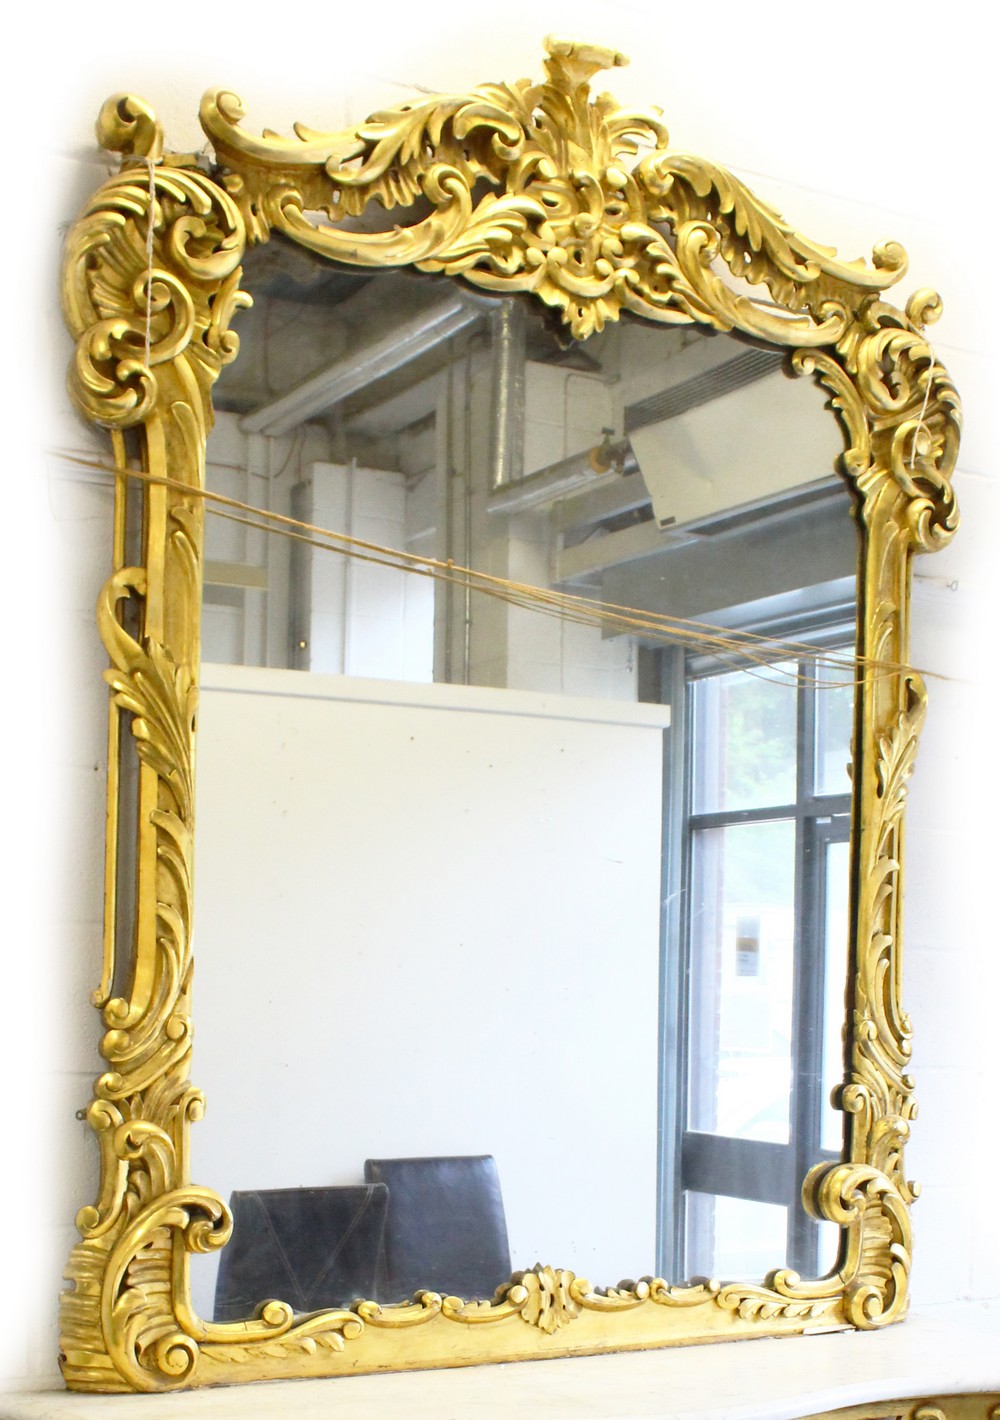 A SUPERB LARGE 18TH-19TH CENTURY ITALIAN CARVED AND GILDED CONSOLE AND MIRROR, the mirror carved - Image 7 of 7